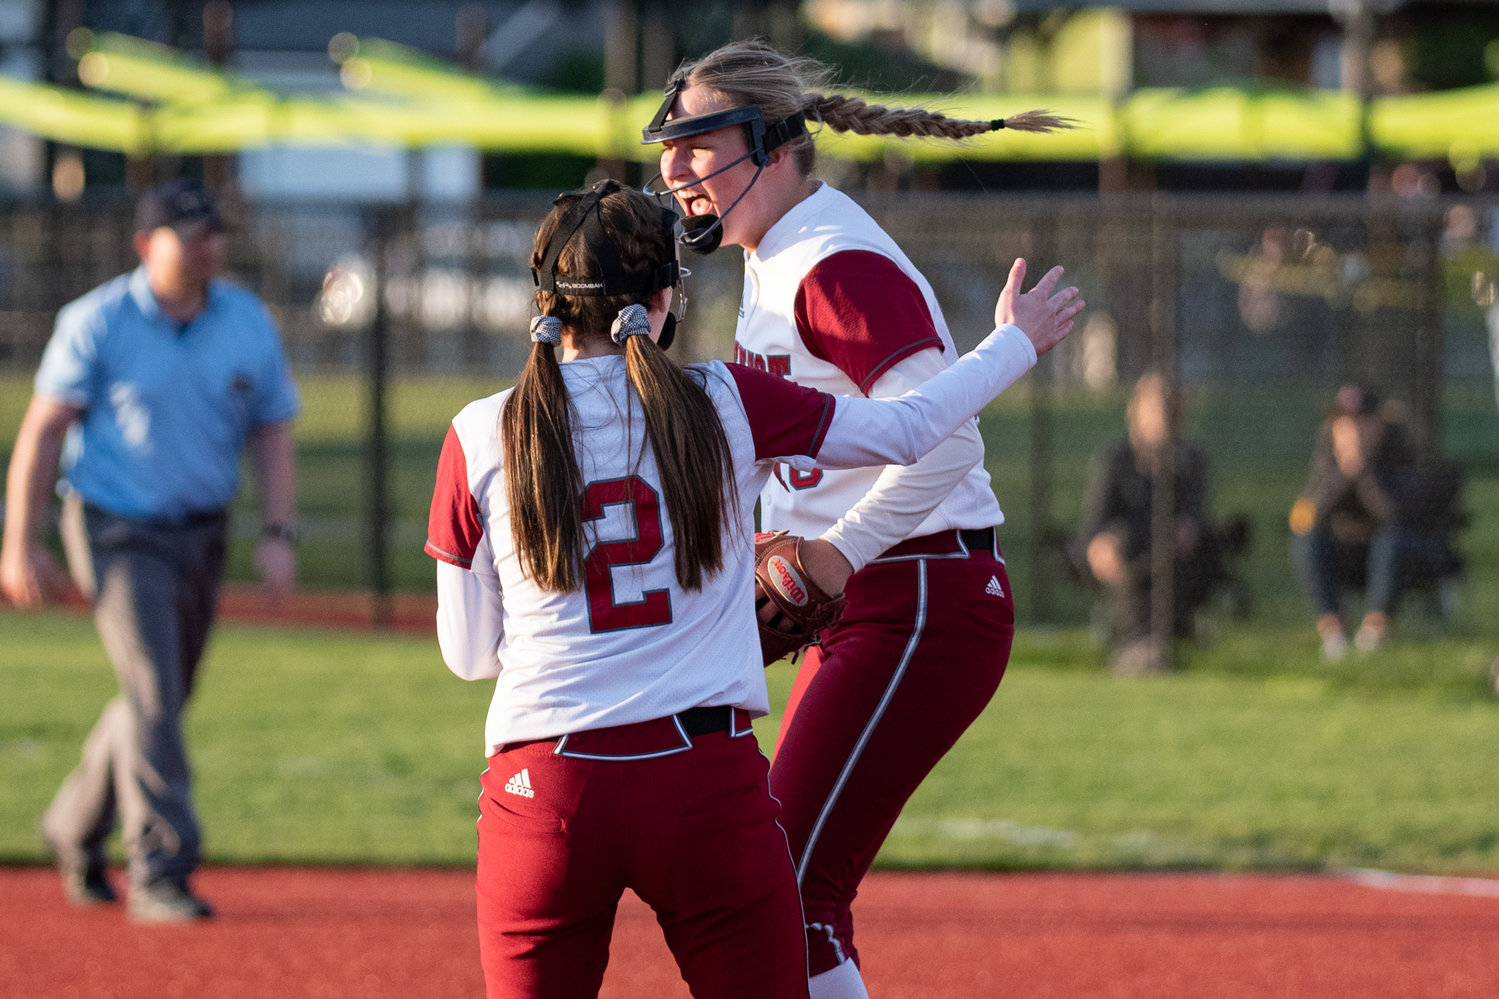 W.F. West pitcher Kamy Dacus and third baseman Saige Brindle (2) celebrate after defeating Tumwater, 4-2, in the district championship game at Rec Park May 20.